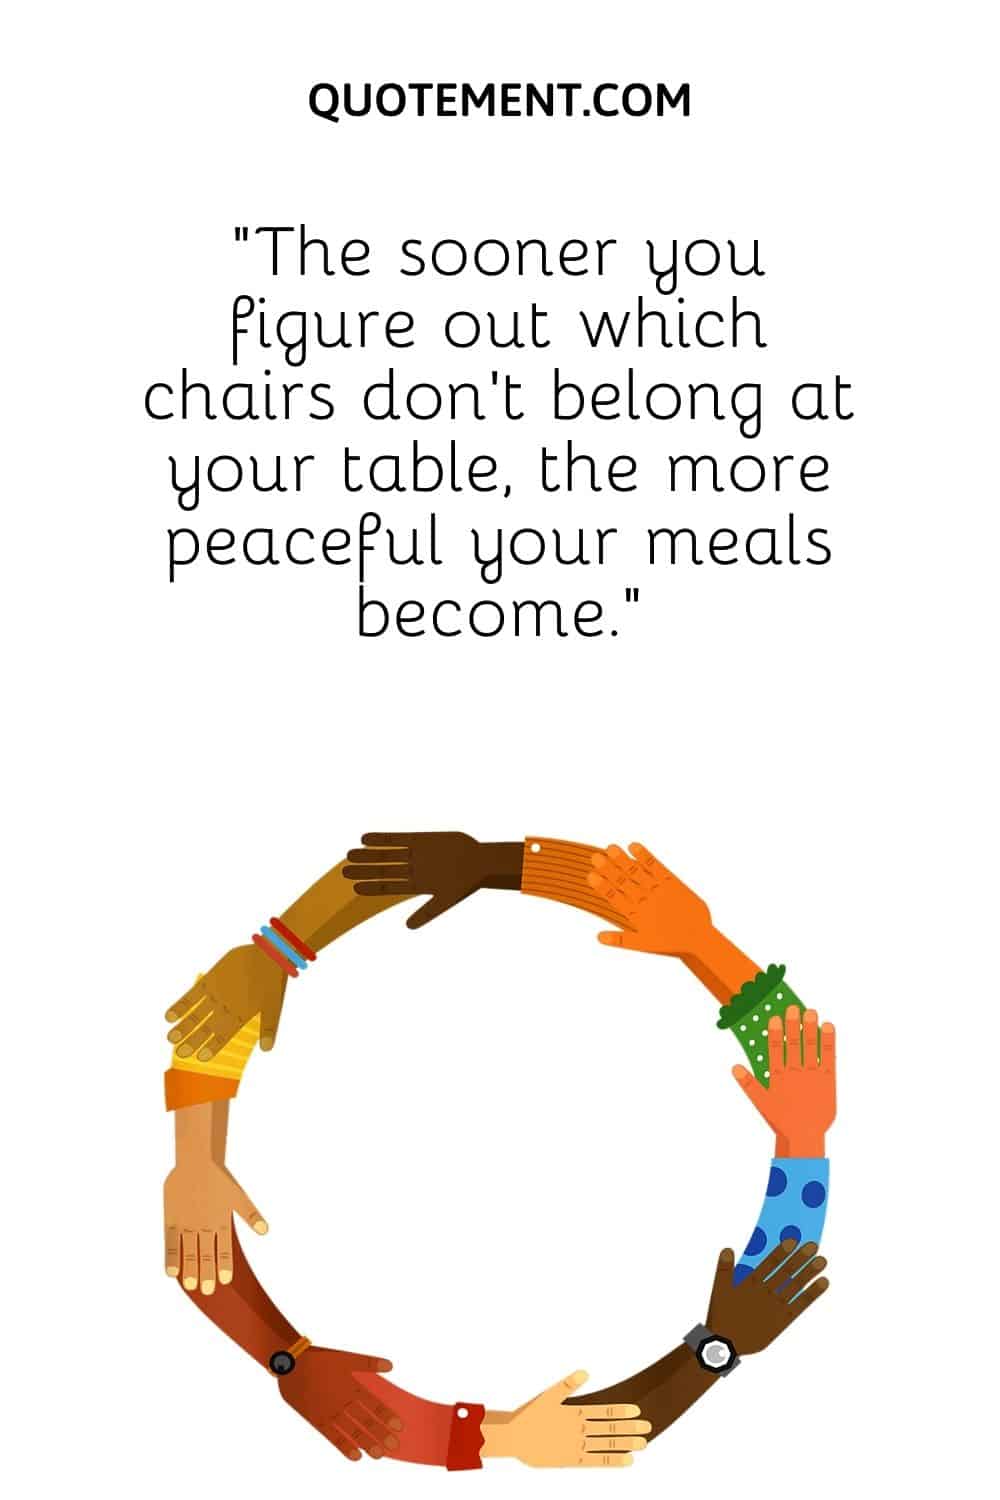 “The sooner you figure out which chairs don’t belong at your table, the more peaceful your meals become.”